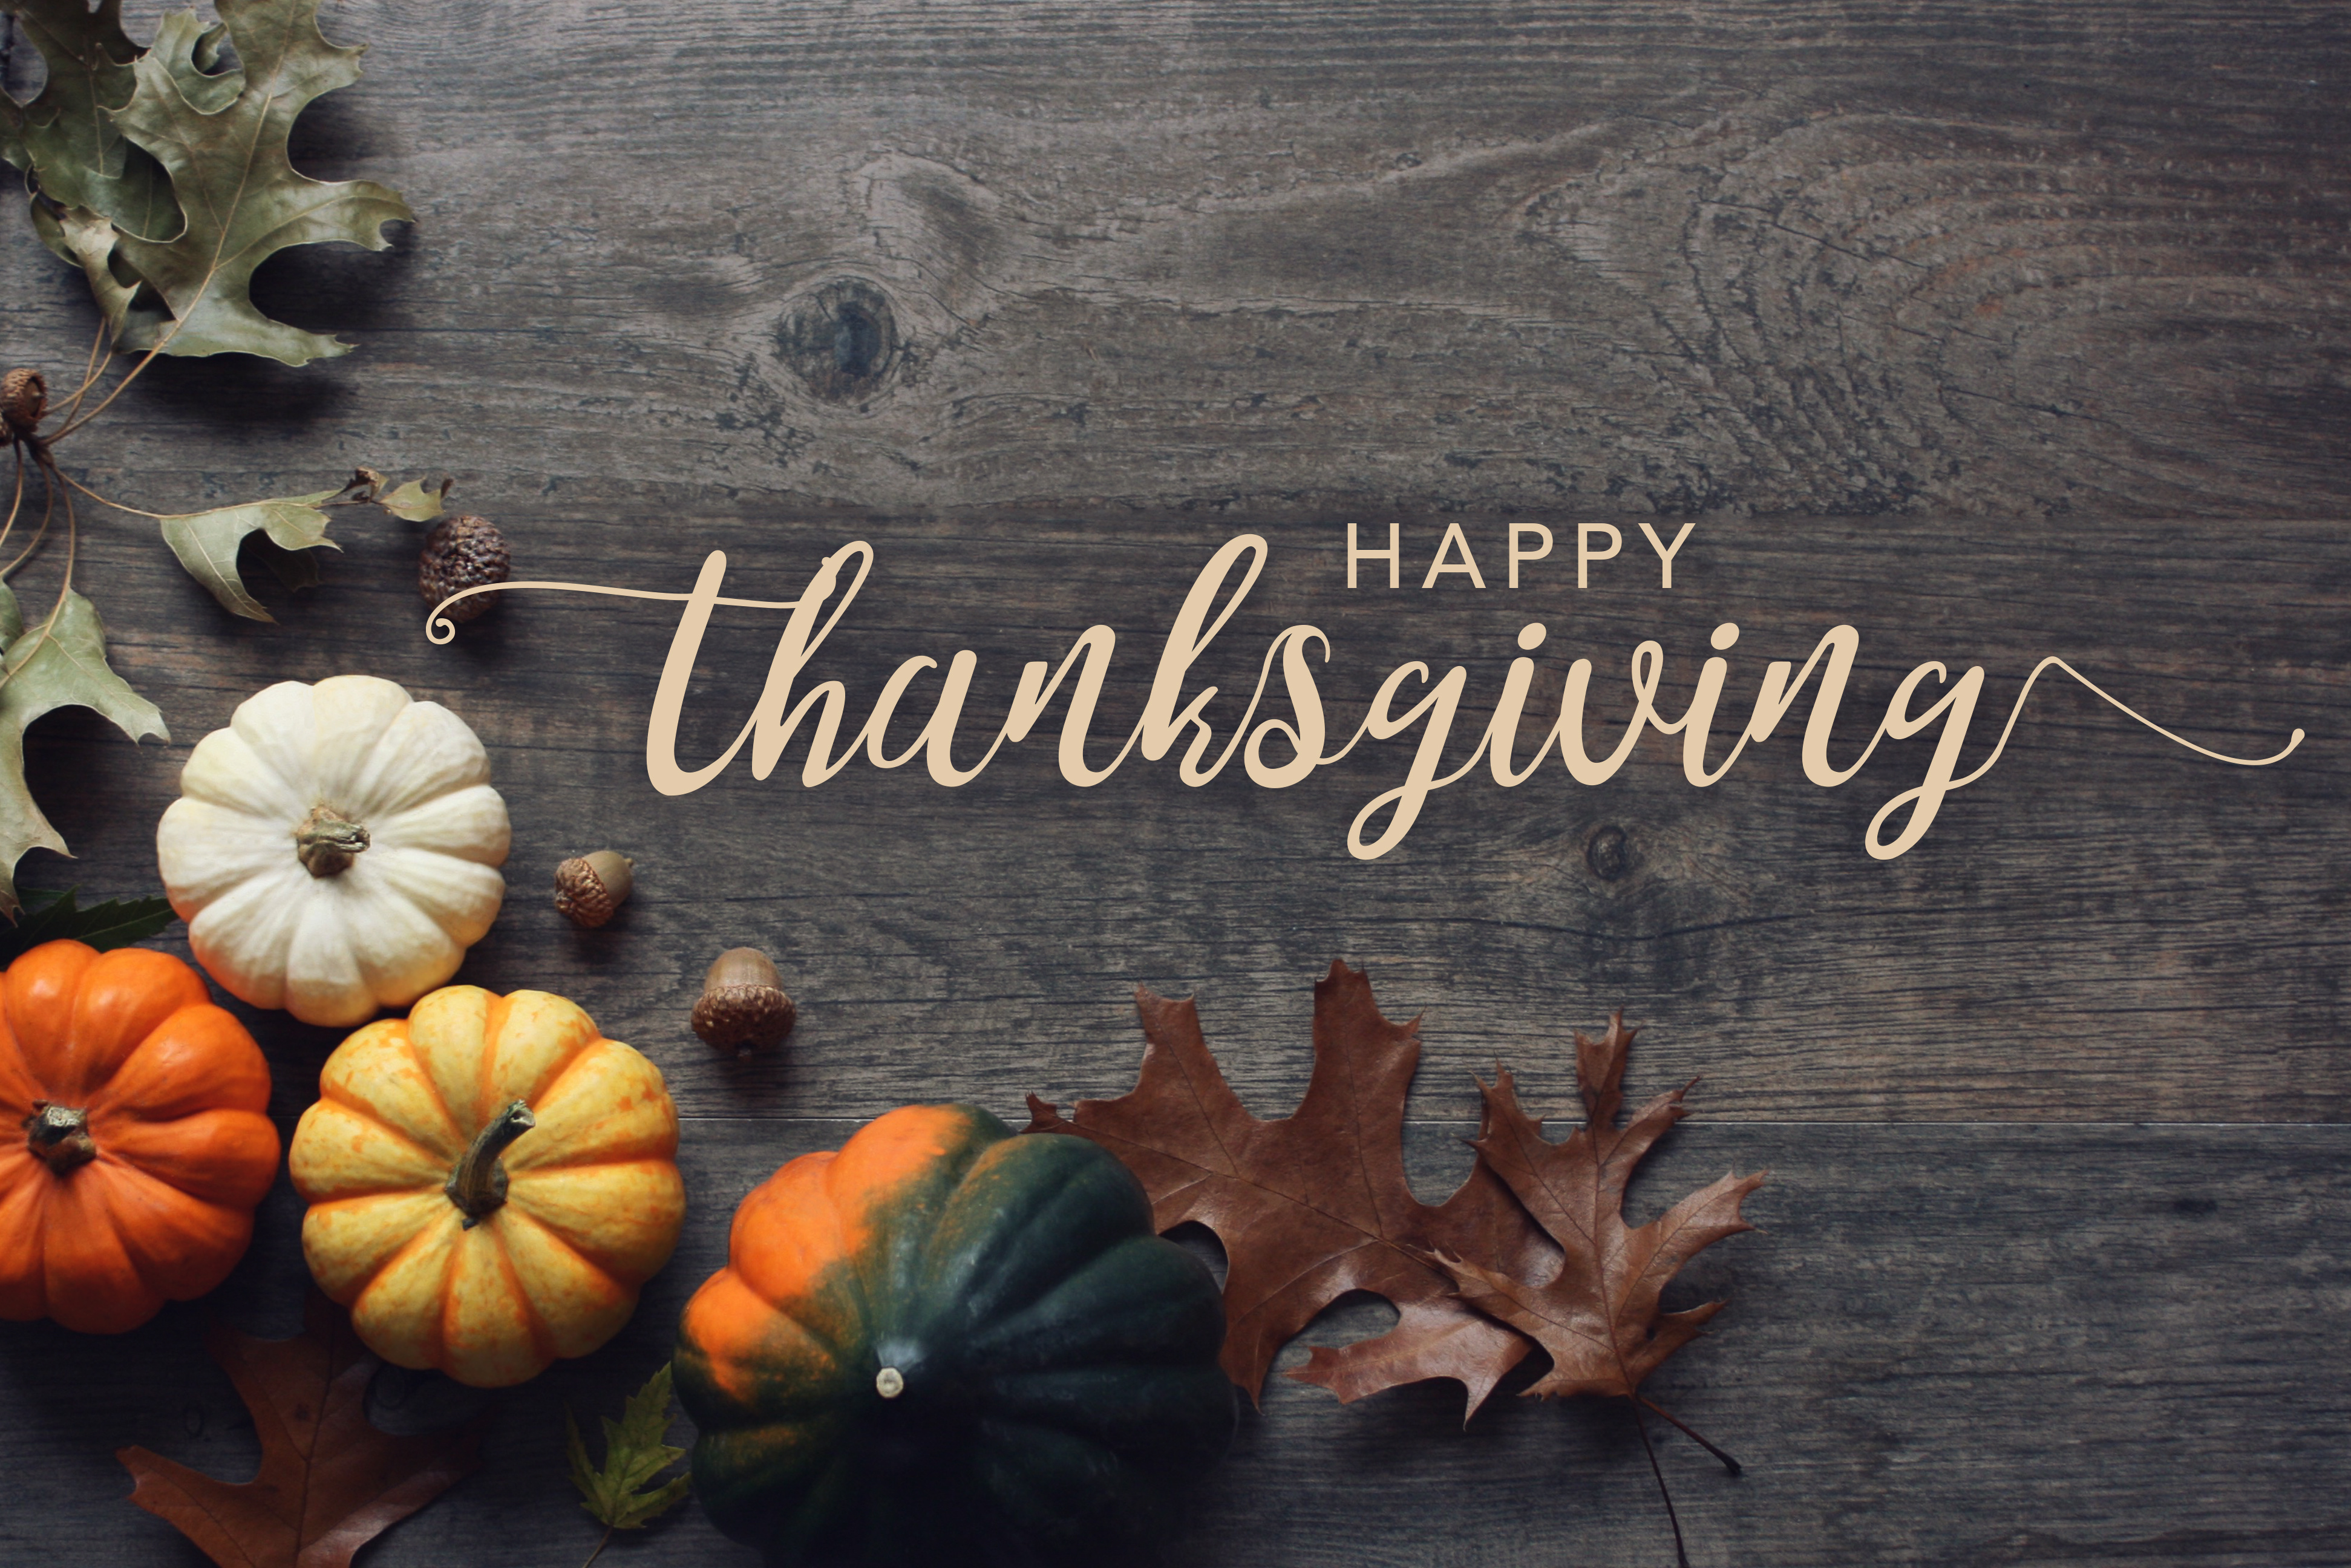 Happy Thanksgiving to Our Families, Friends, Customers, and Colleagues